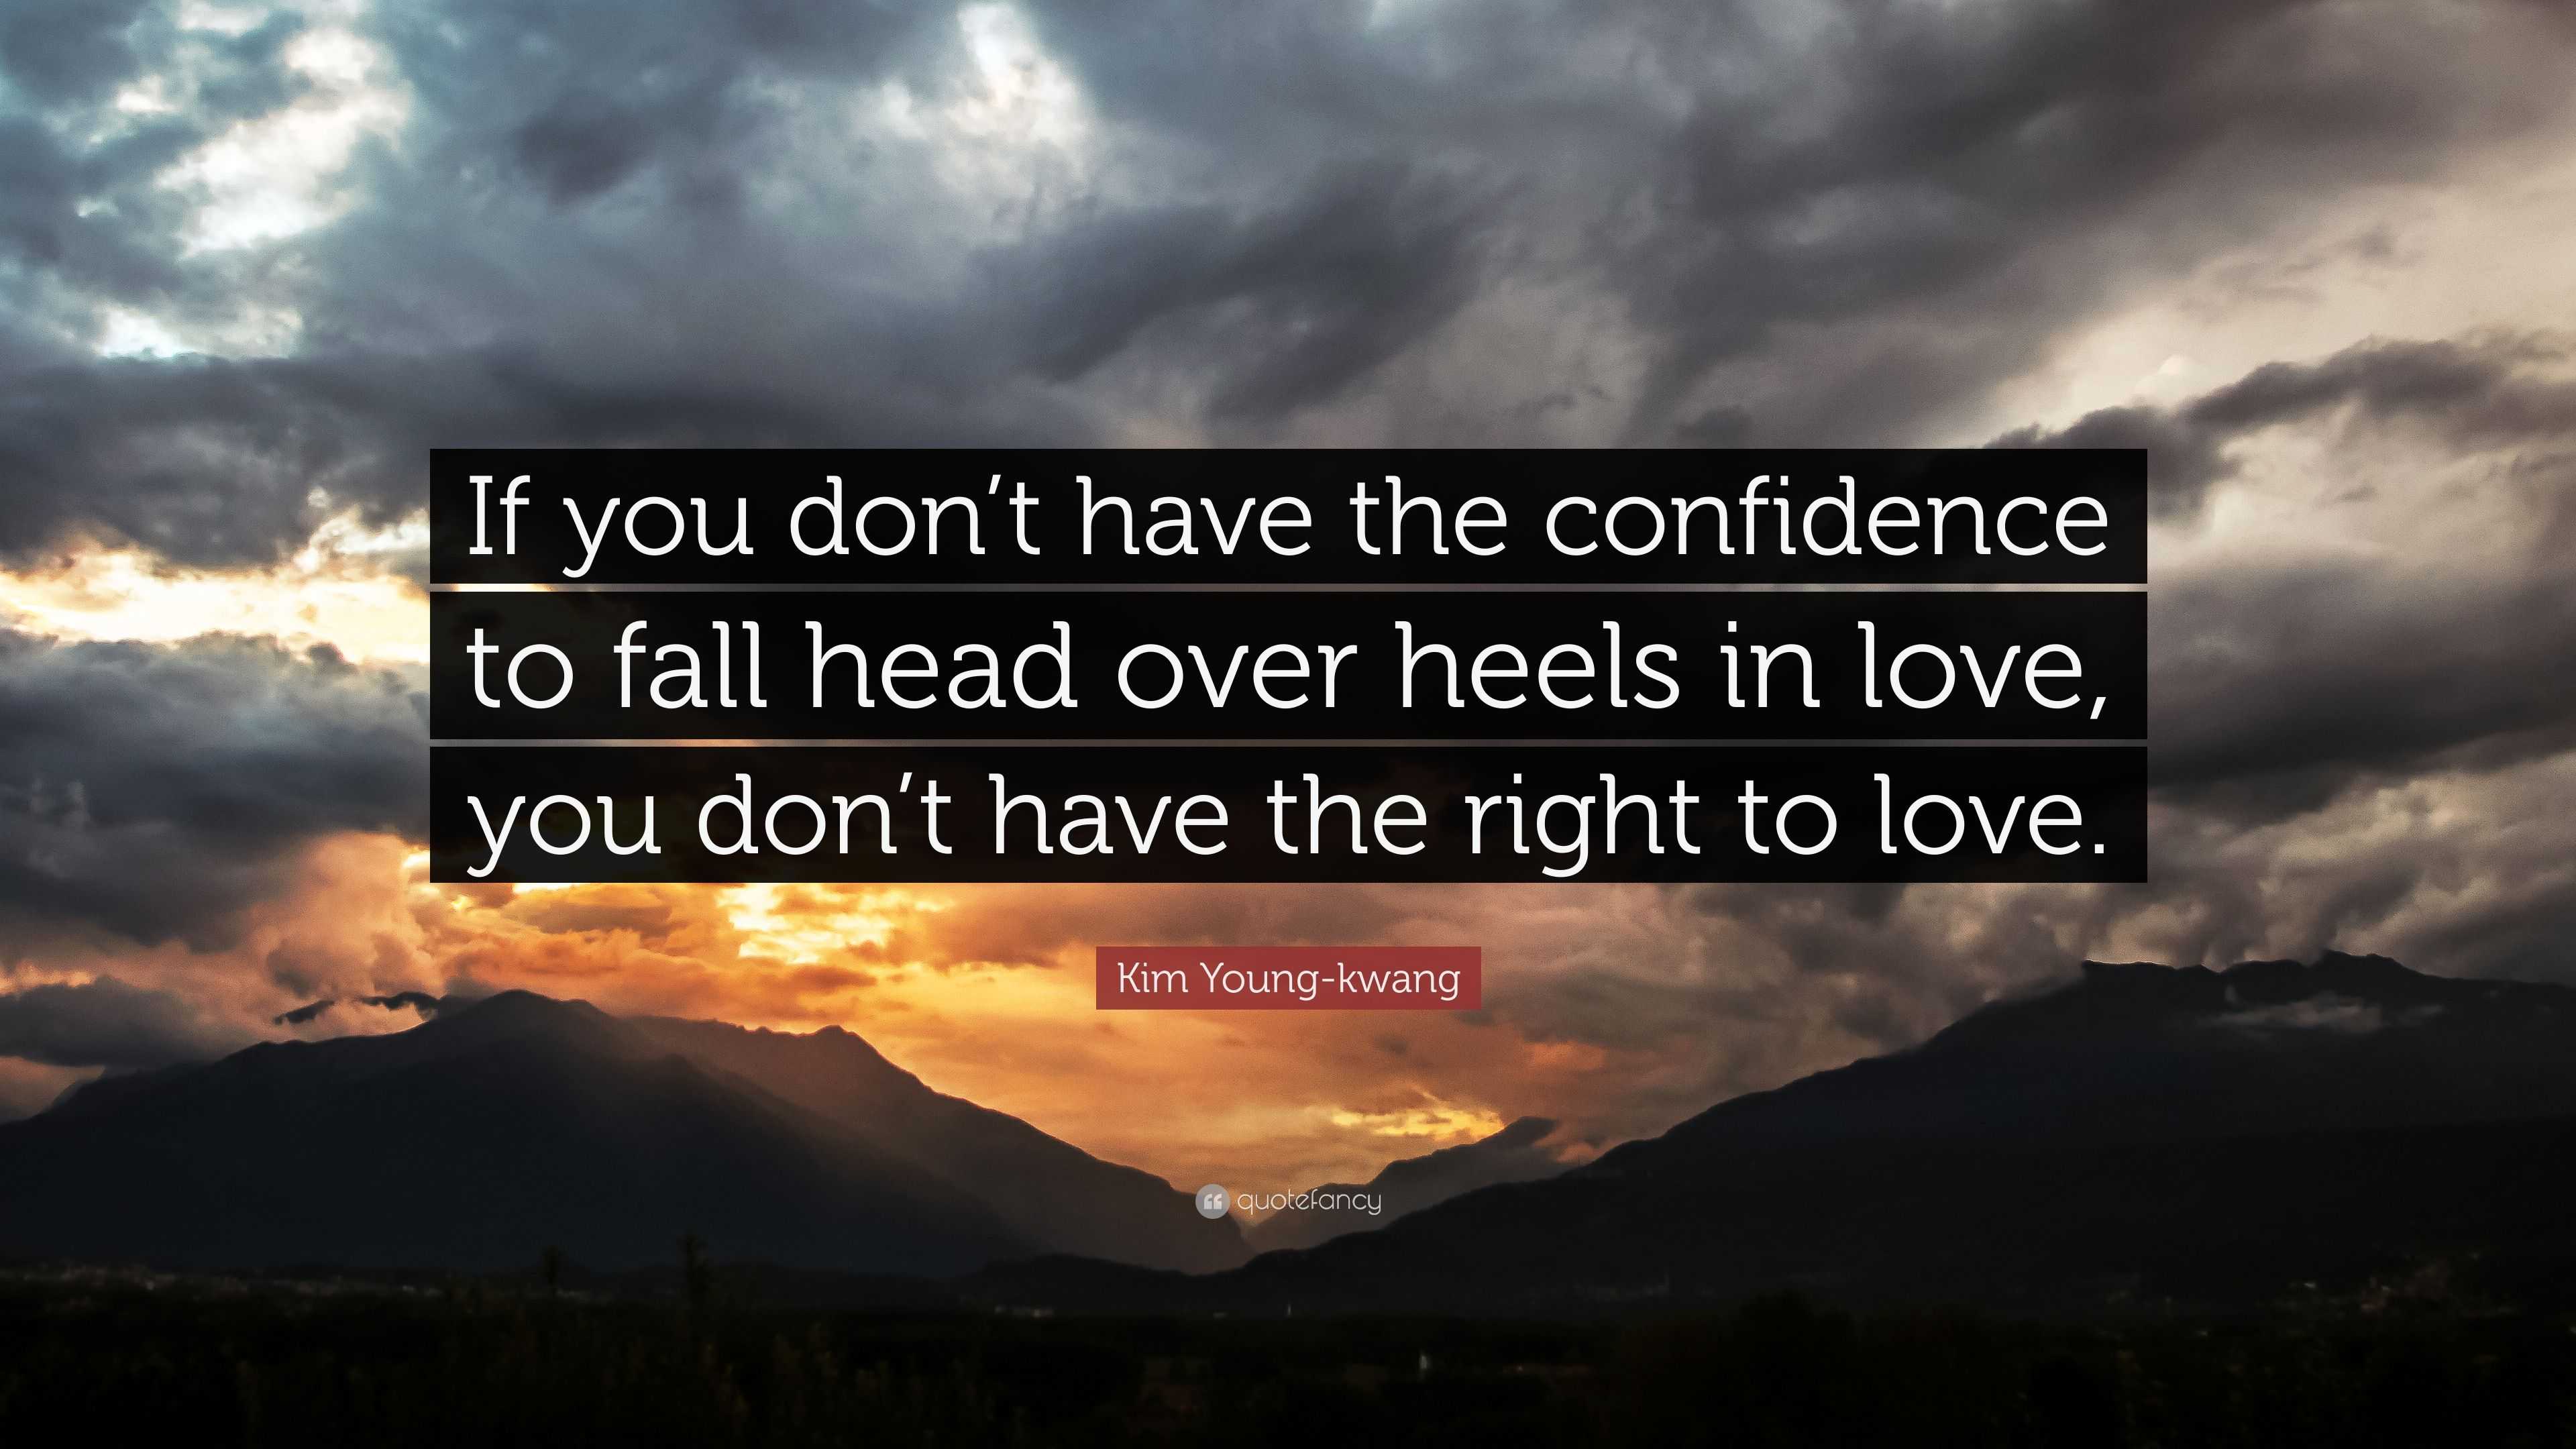 Im Falling Head Over Heels For You Quotes. QuotesGram